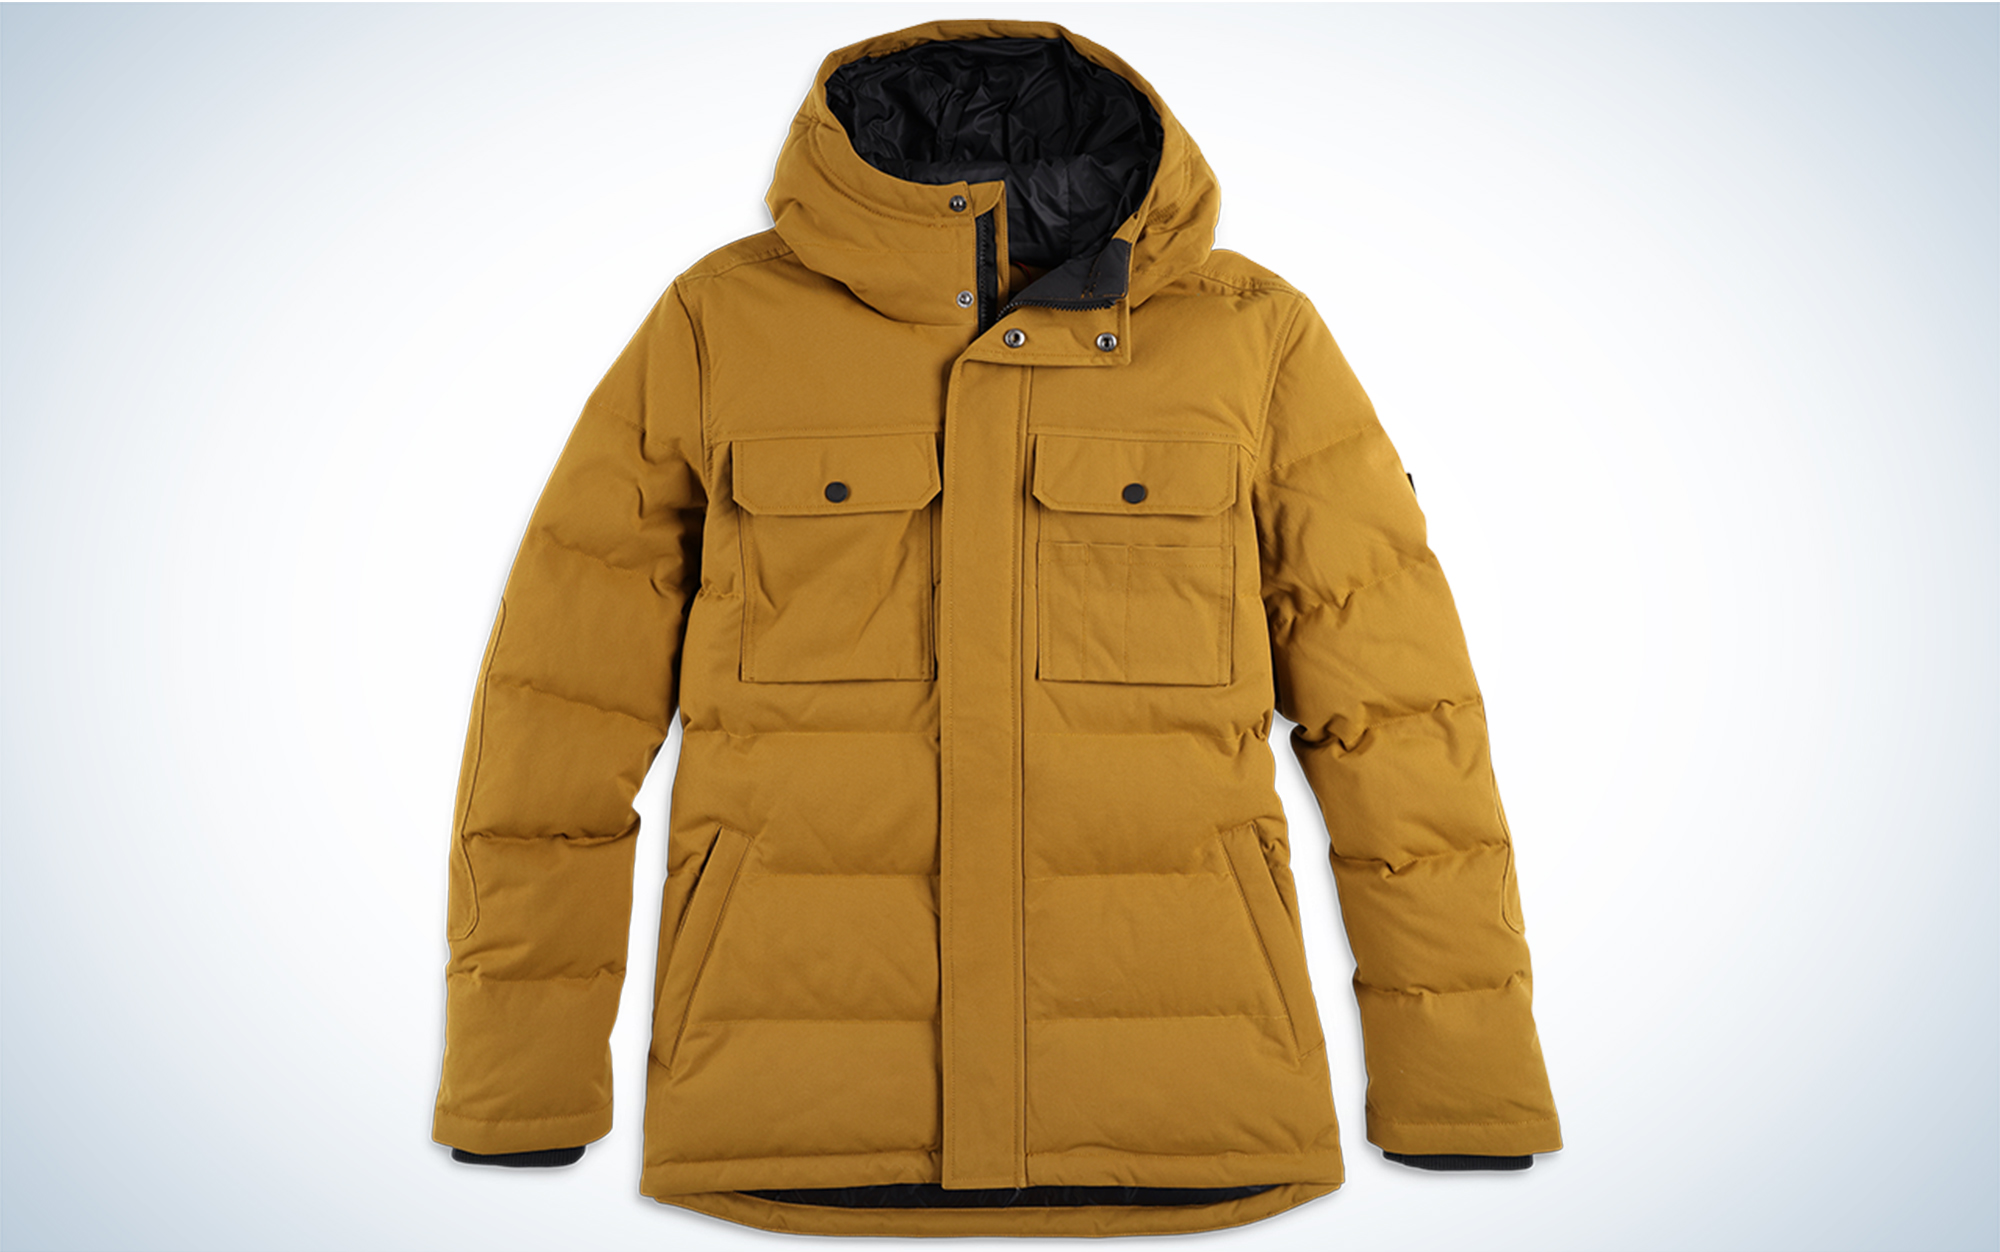 The Outdoor Research Del Campo Down Parka is the most durable.